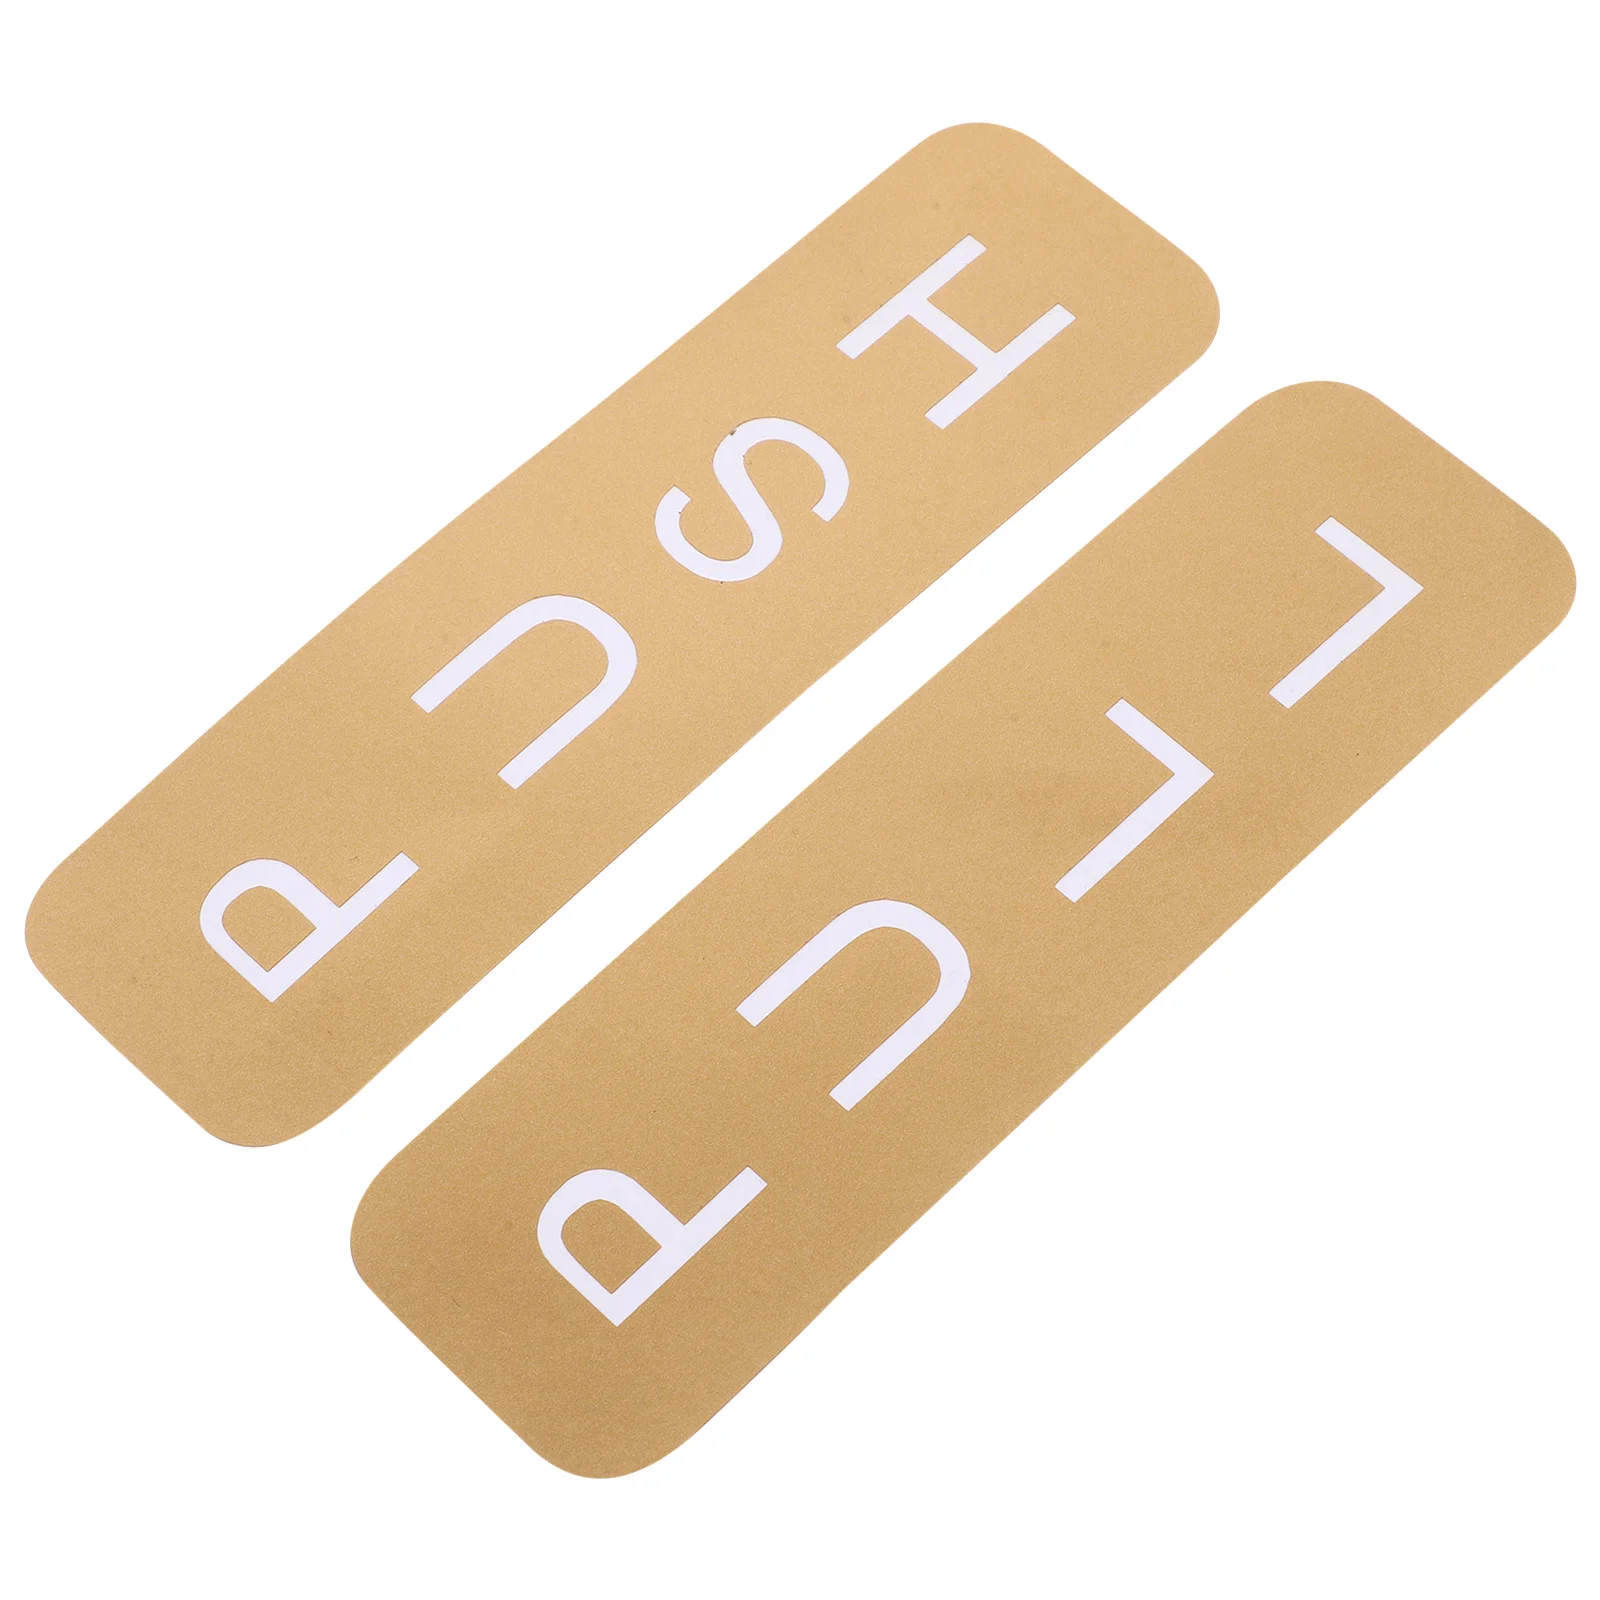 

Gold Sliding Door Sticker Pull Push Decal Nail Sticker Office Signs Sticky Decals Decor